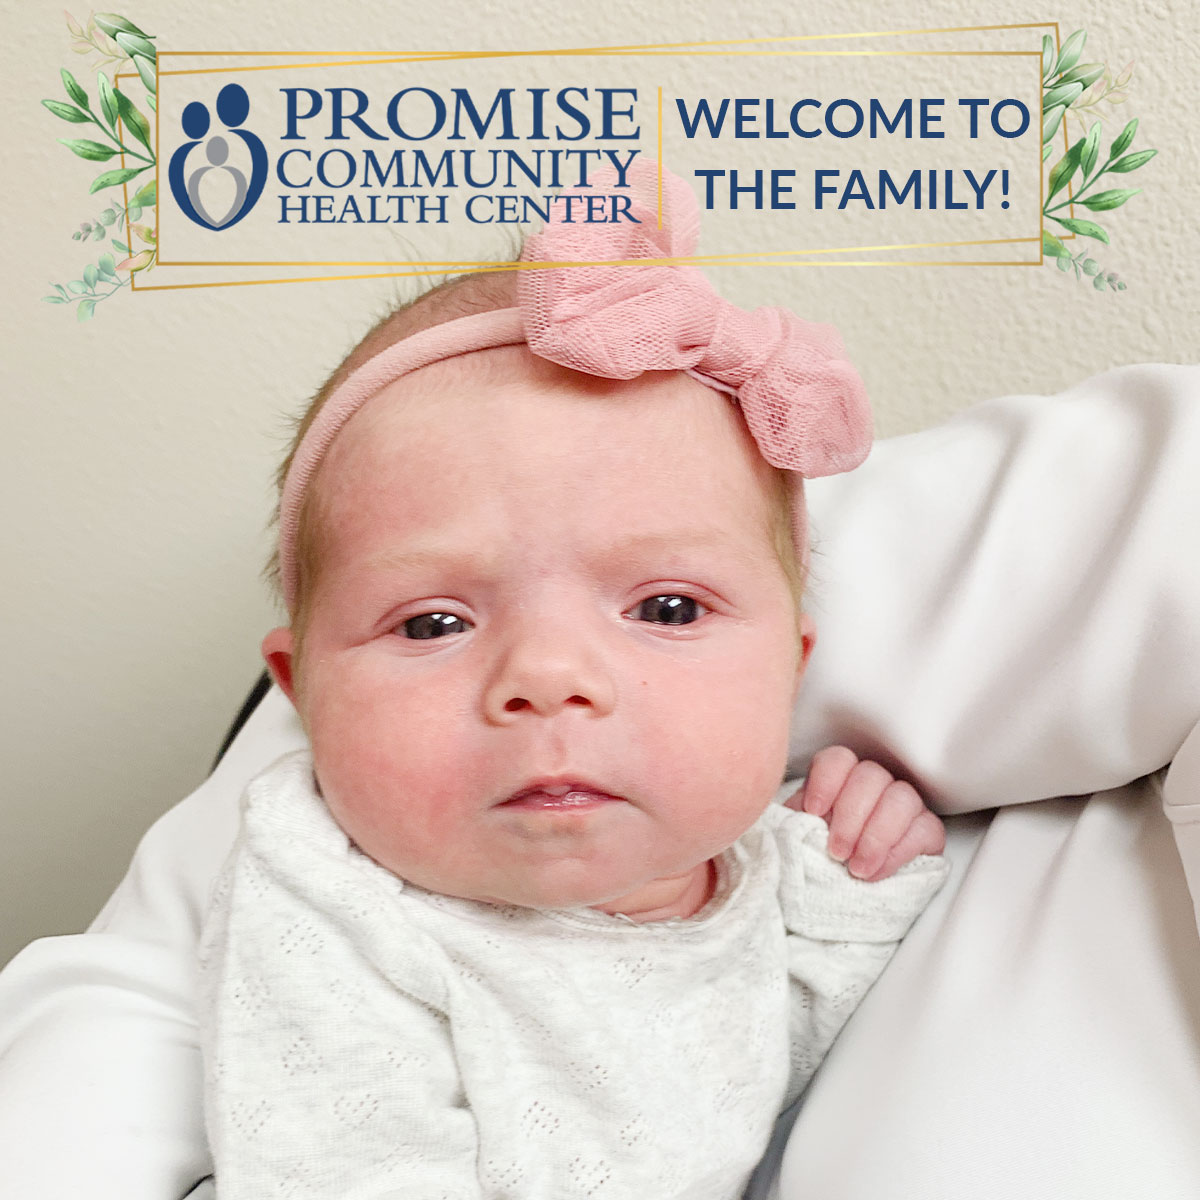 Home birth in Sioux Center, Iowa | Promise Community Health Center in Sioux Center, Iowa | Home births in northwest Iowa, Home births in southeast South Dakota, Home births in southwest Minnesota | Home births in Sioux Falls South Dakota, Home births in Beresford South Dakota, Home births in Sioux City IA, Home births in LeMars IA, Home births in Worthington MN, Home births in Iowa, Home births in South Dakota, Home births in Minnesota